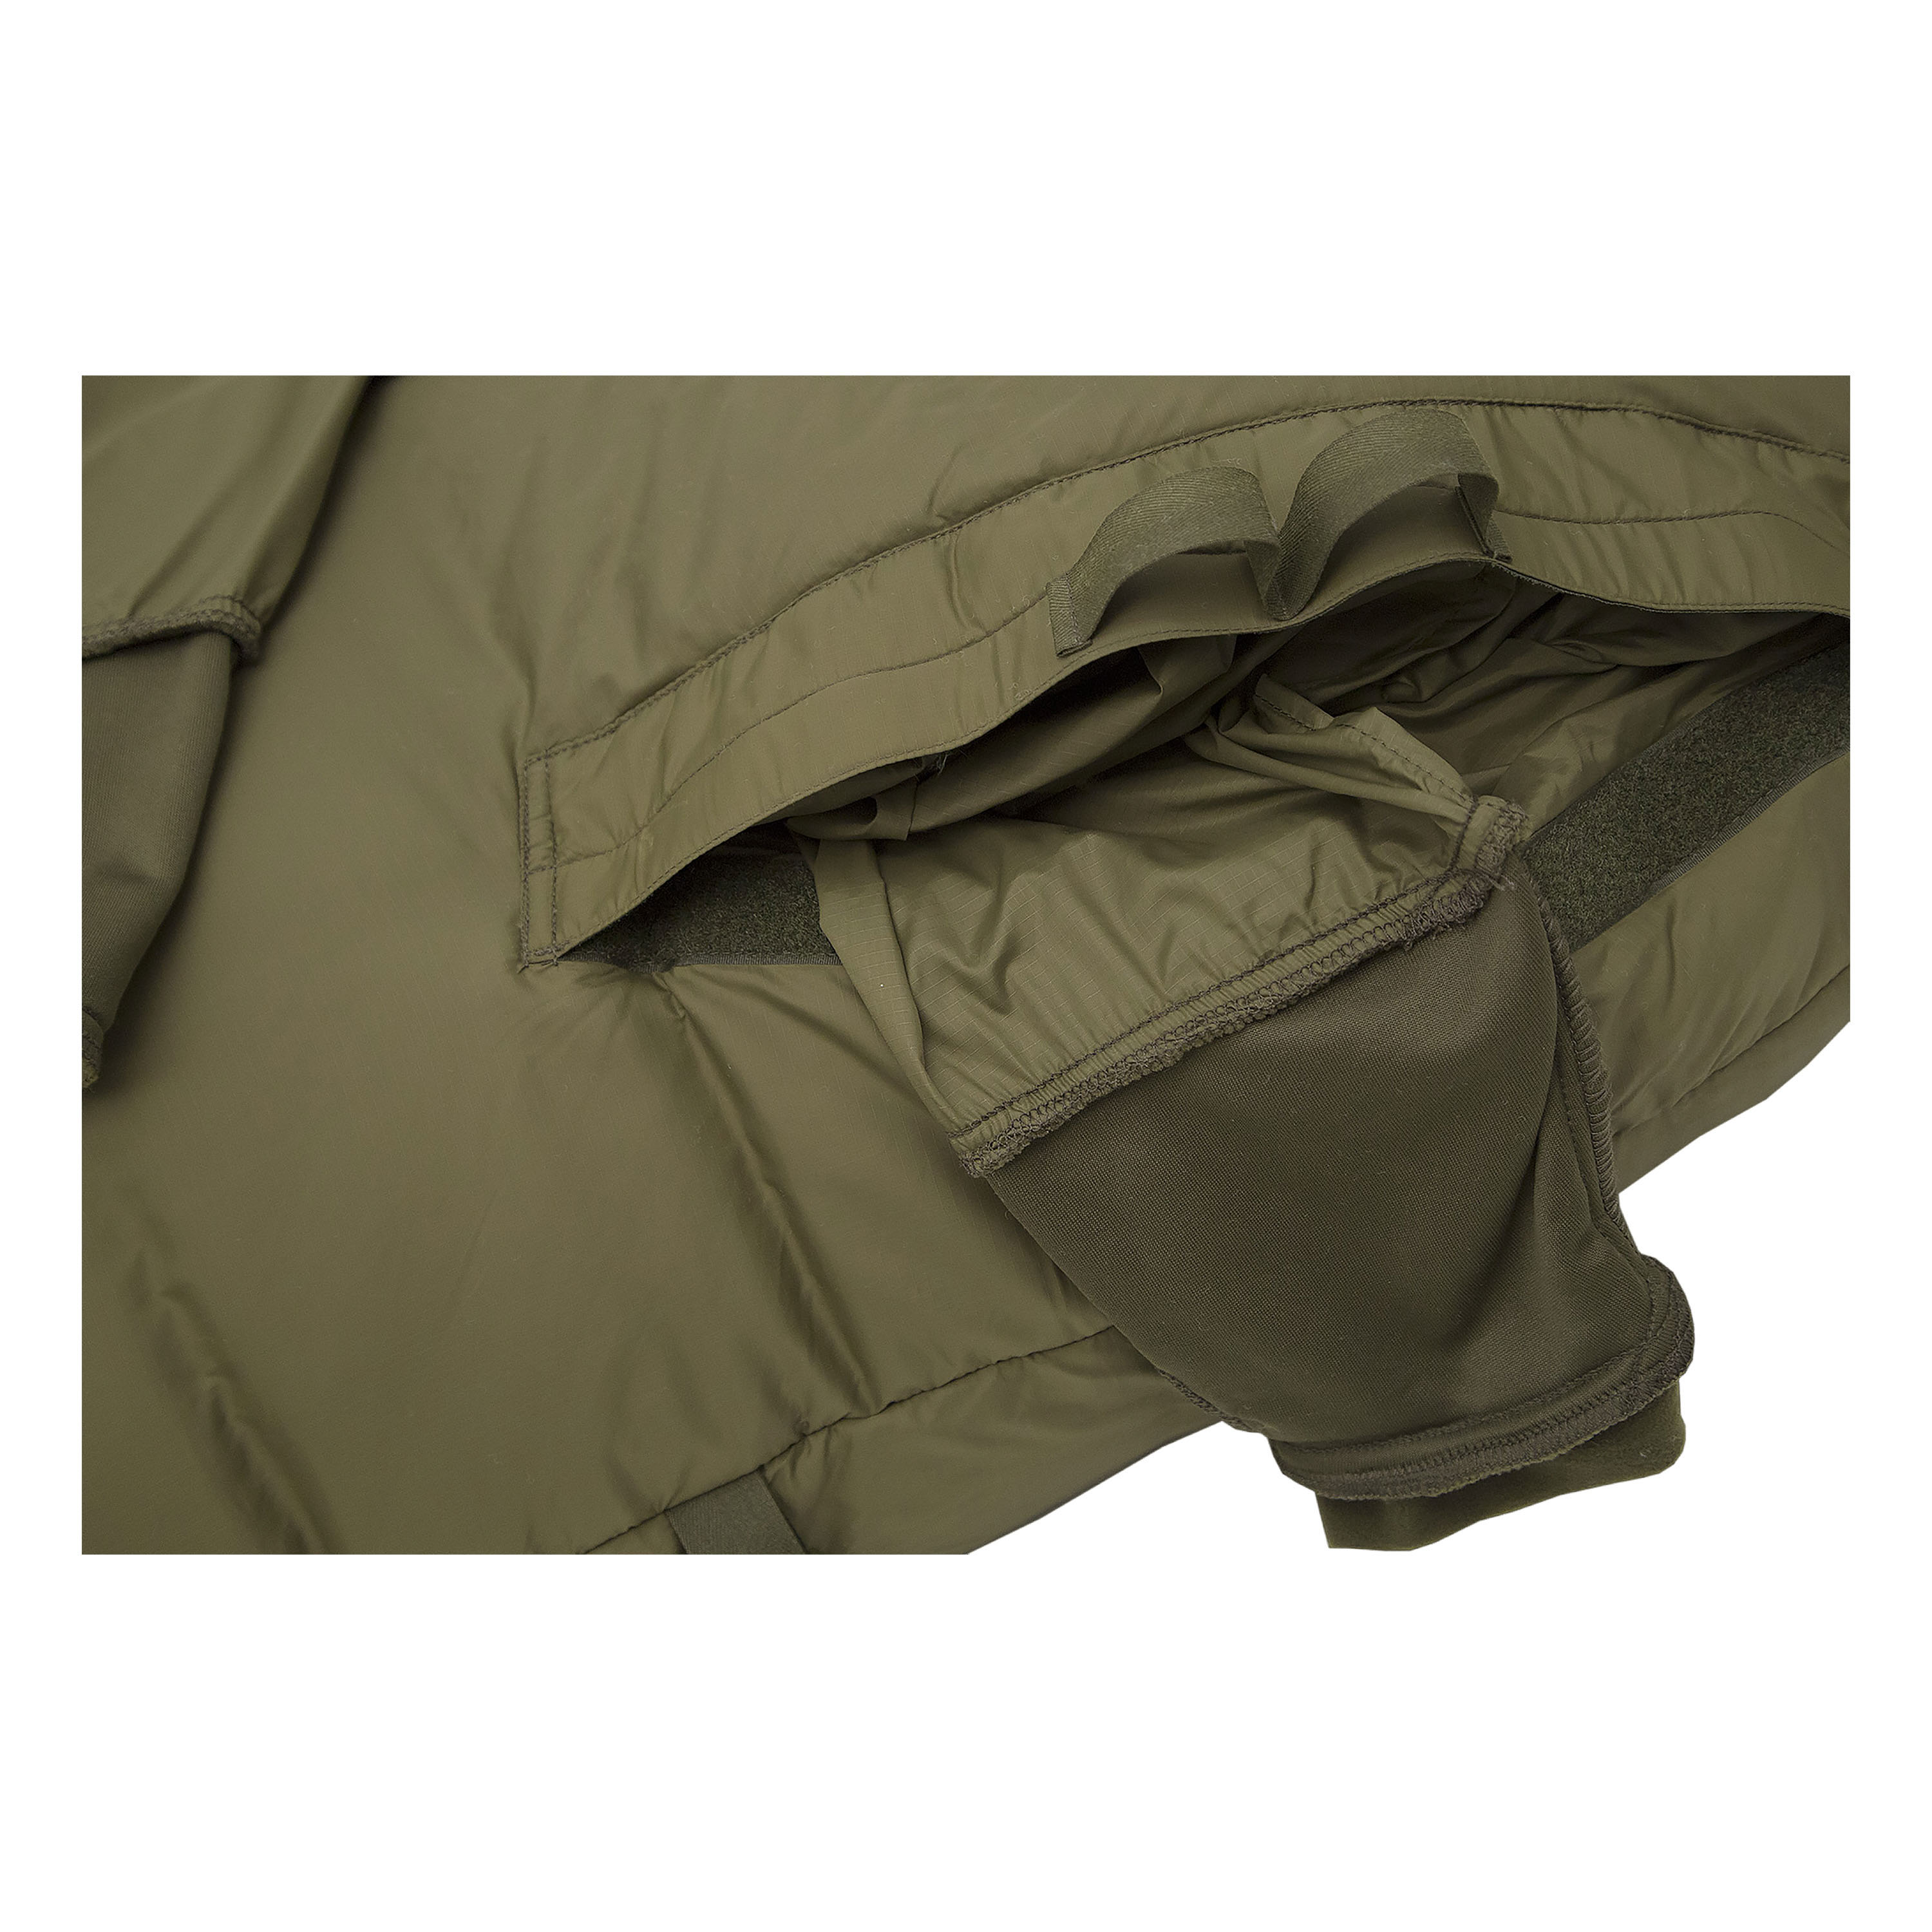 Purchase the Sleeping Bag Carinthia Survival One by ASMC